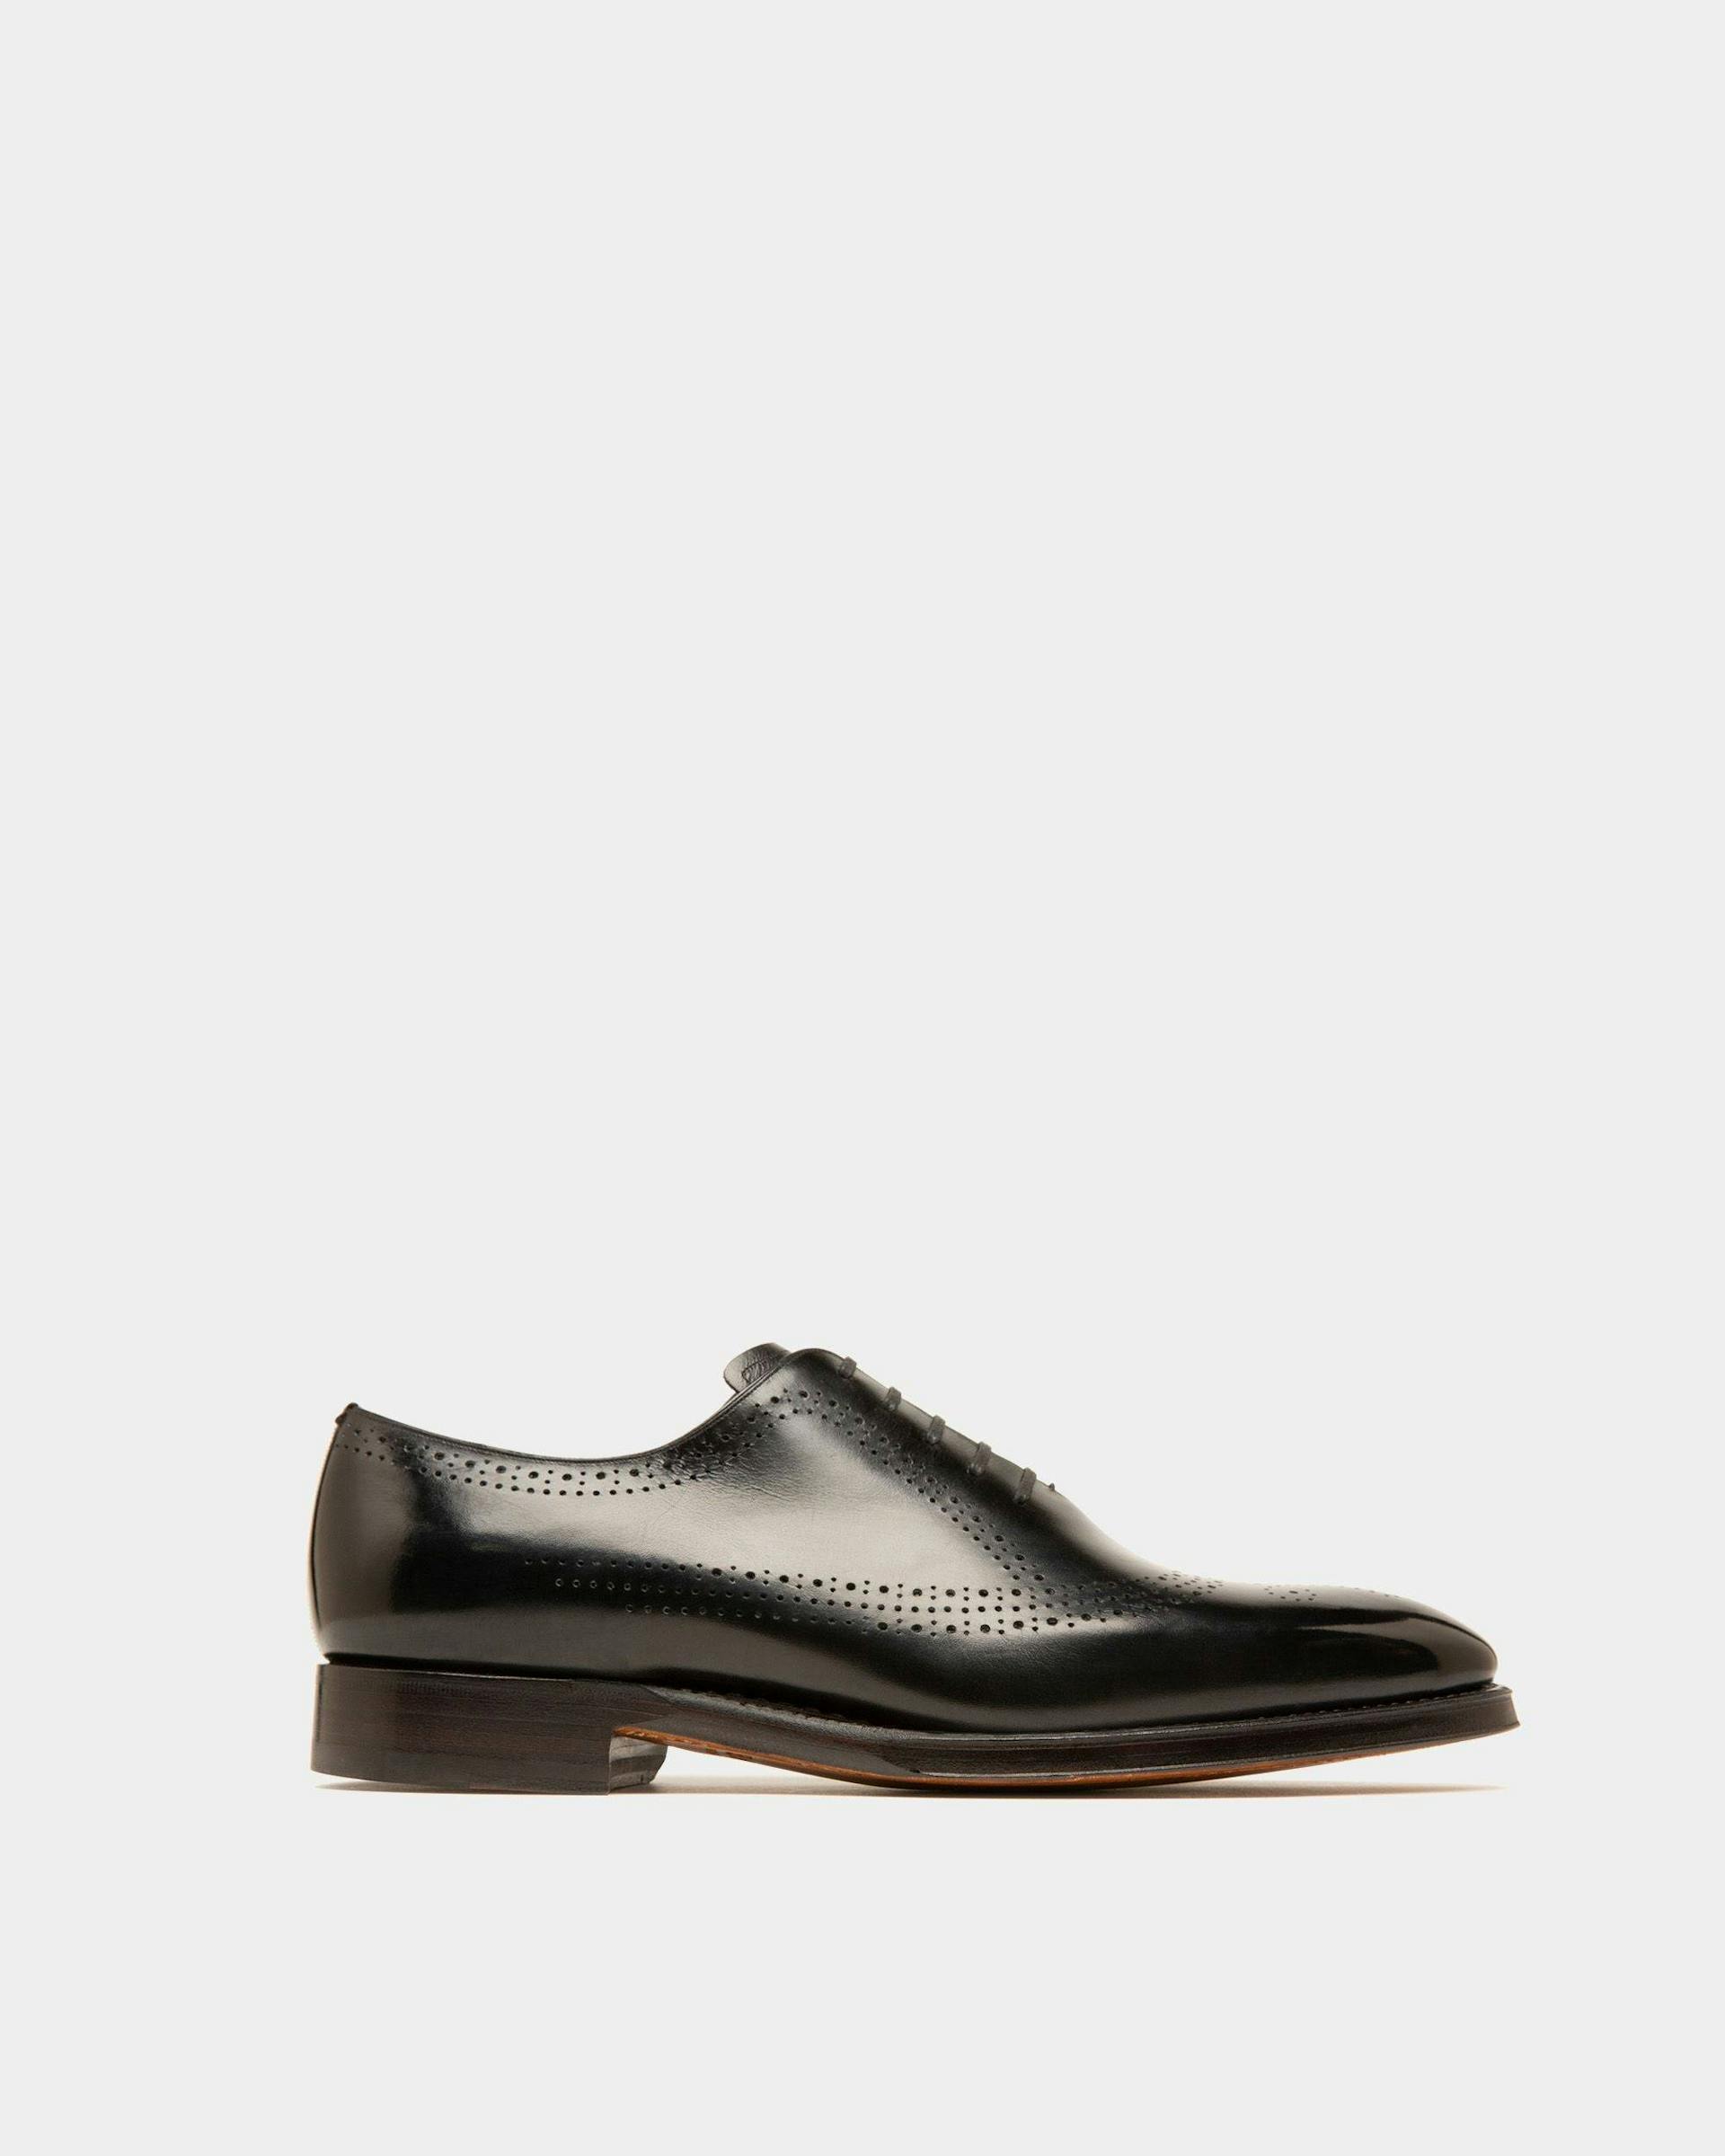 Oxford Shoes In Black Leather - Men's - Bally - 01